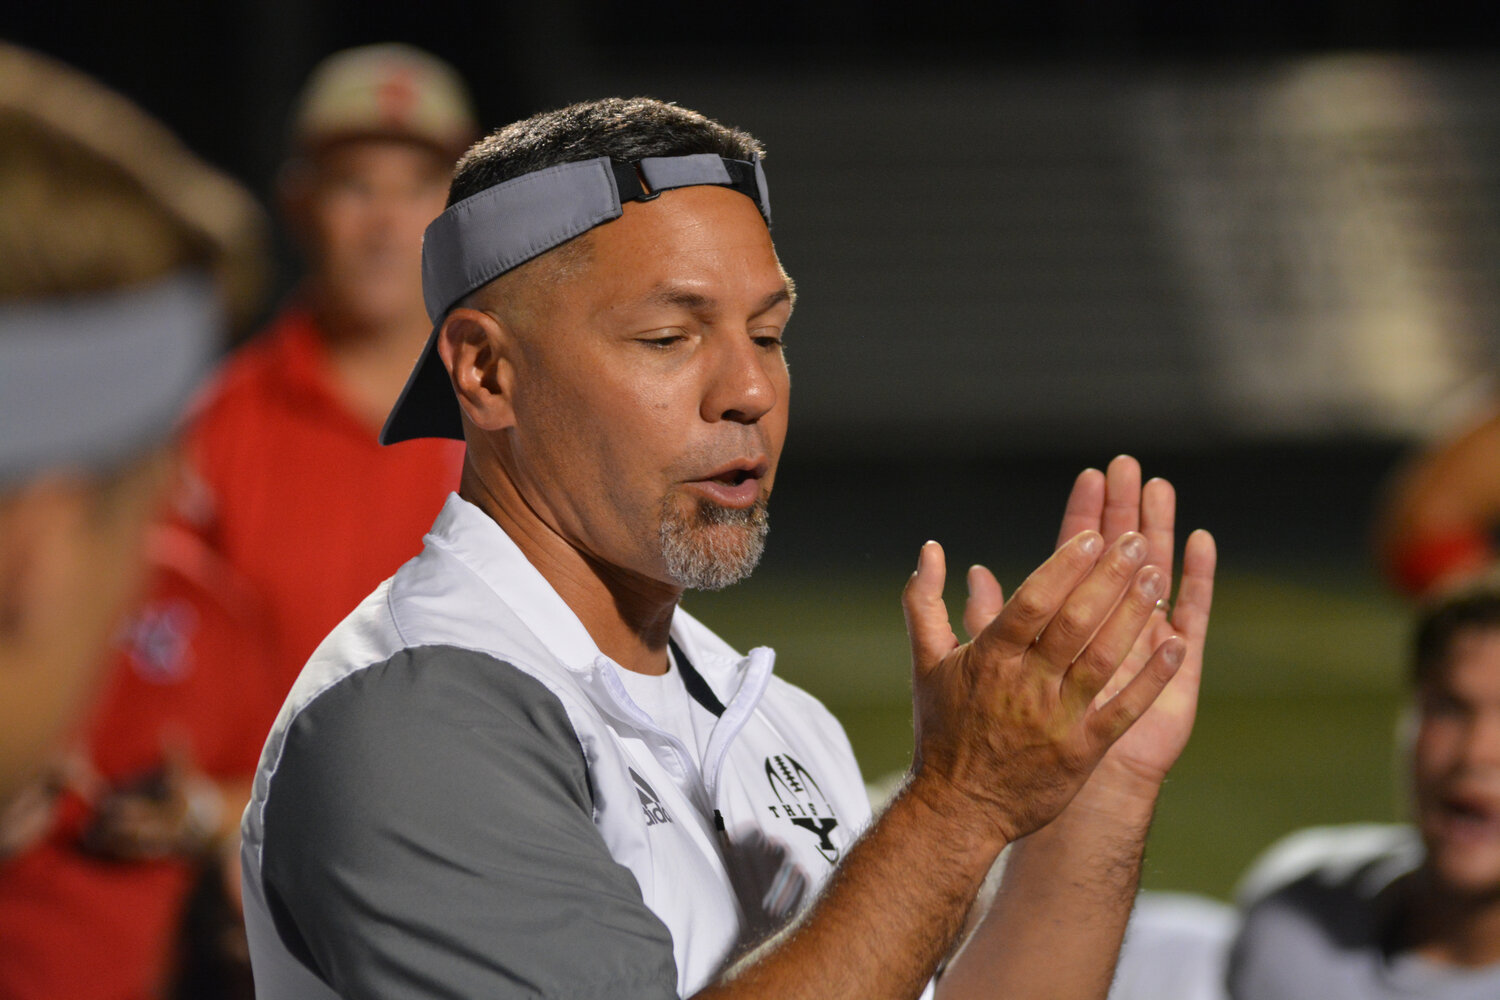 Head coach Jason Ronquillo applauds his team after an 8-7 victory over the Camas Papermakers on Sept. 1.